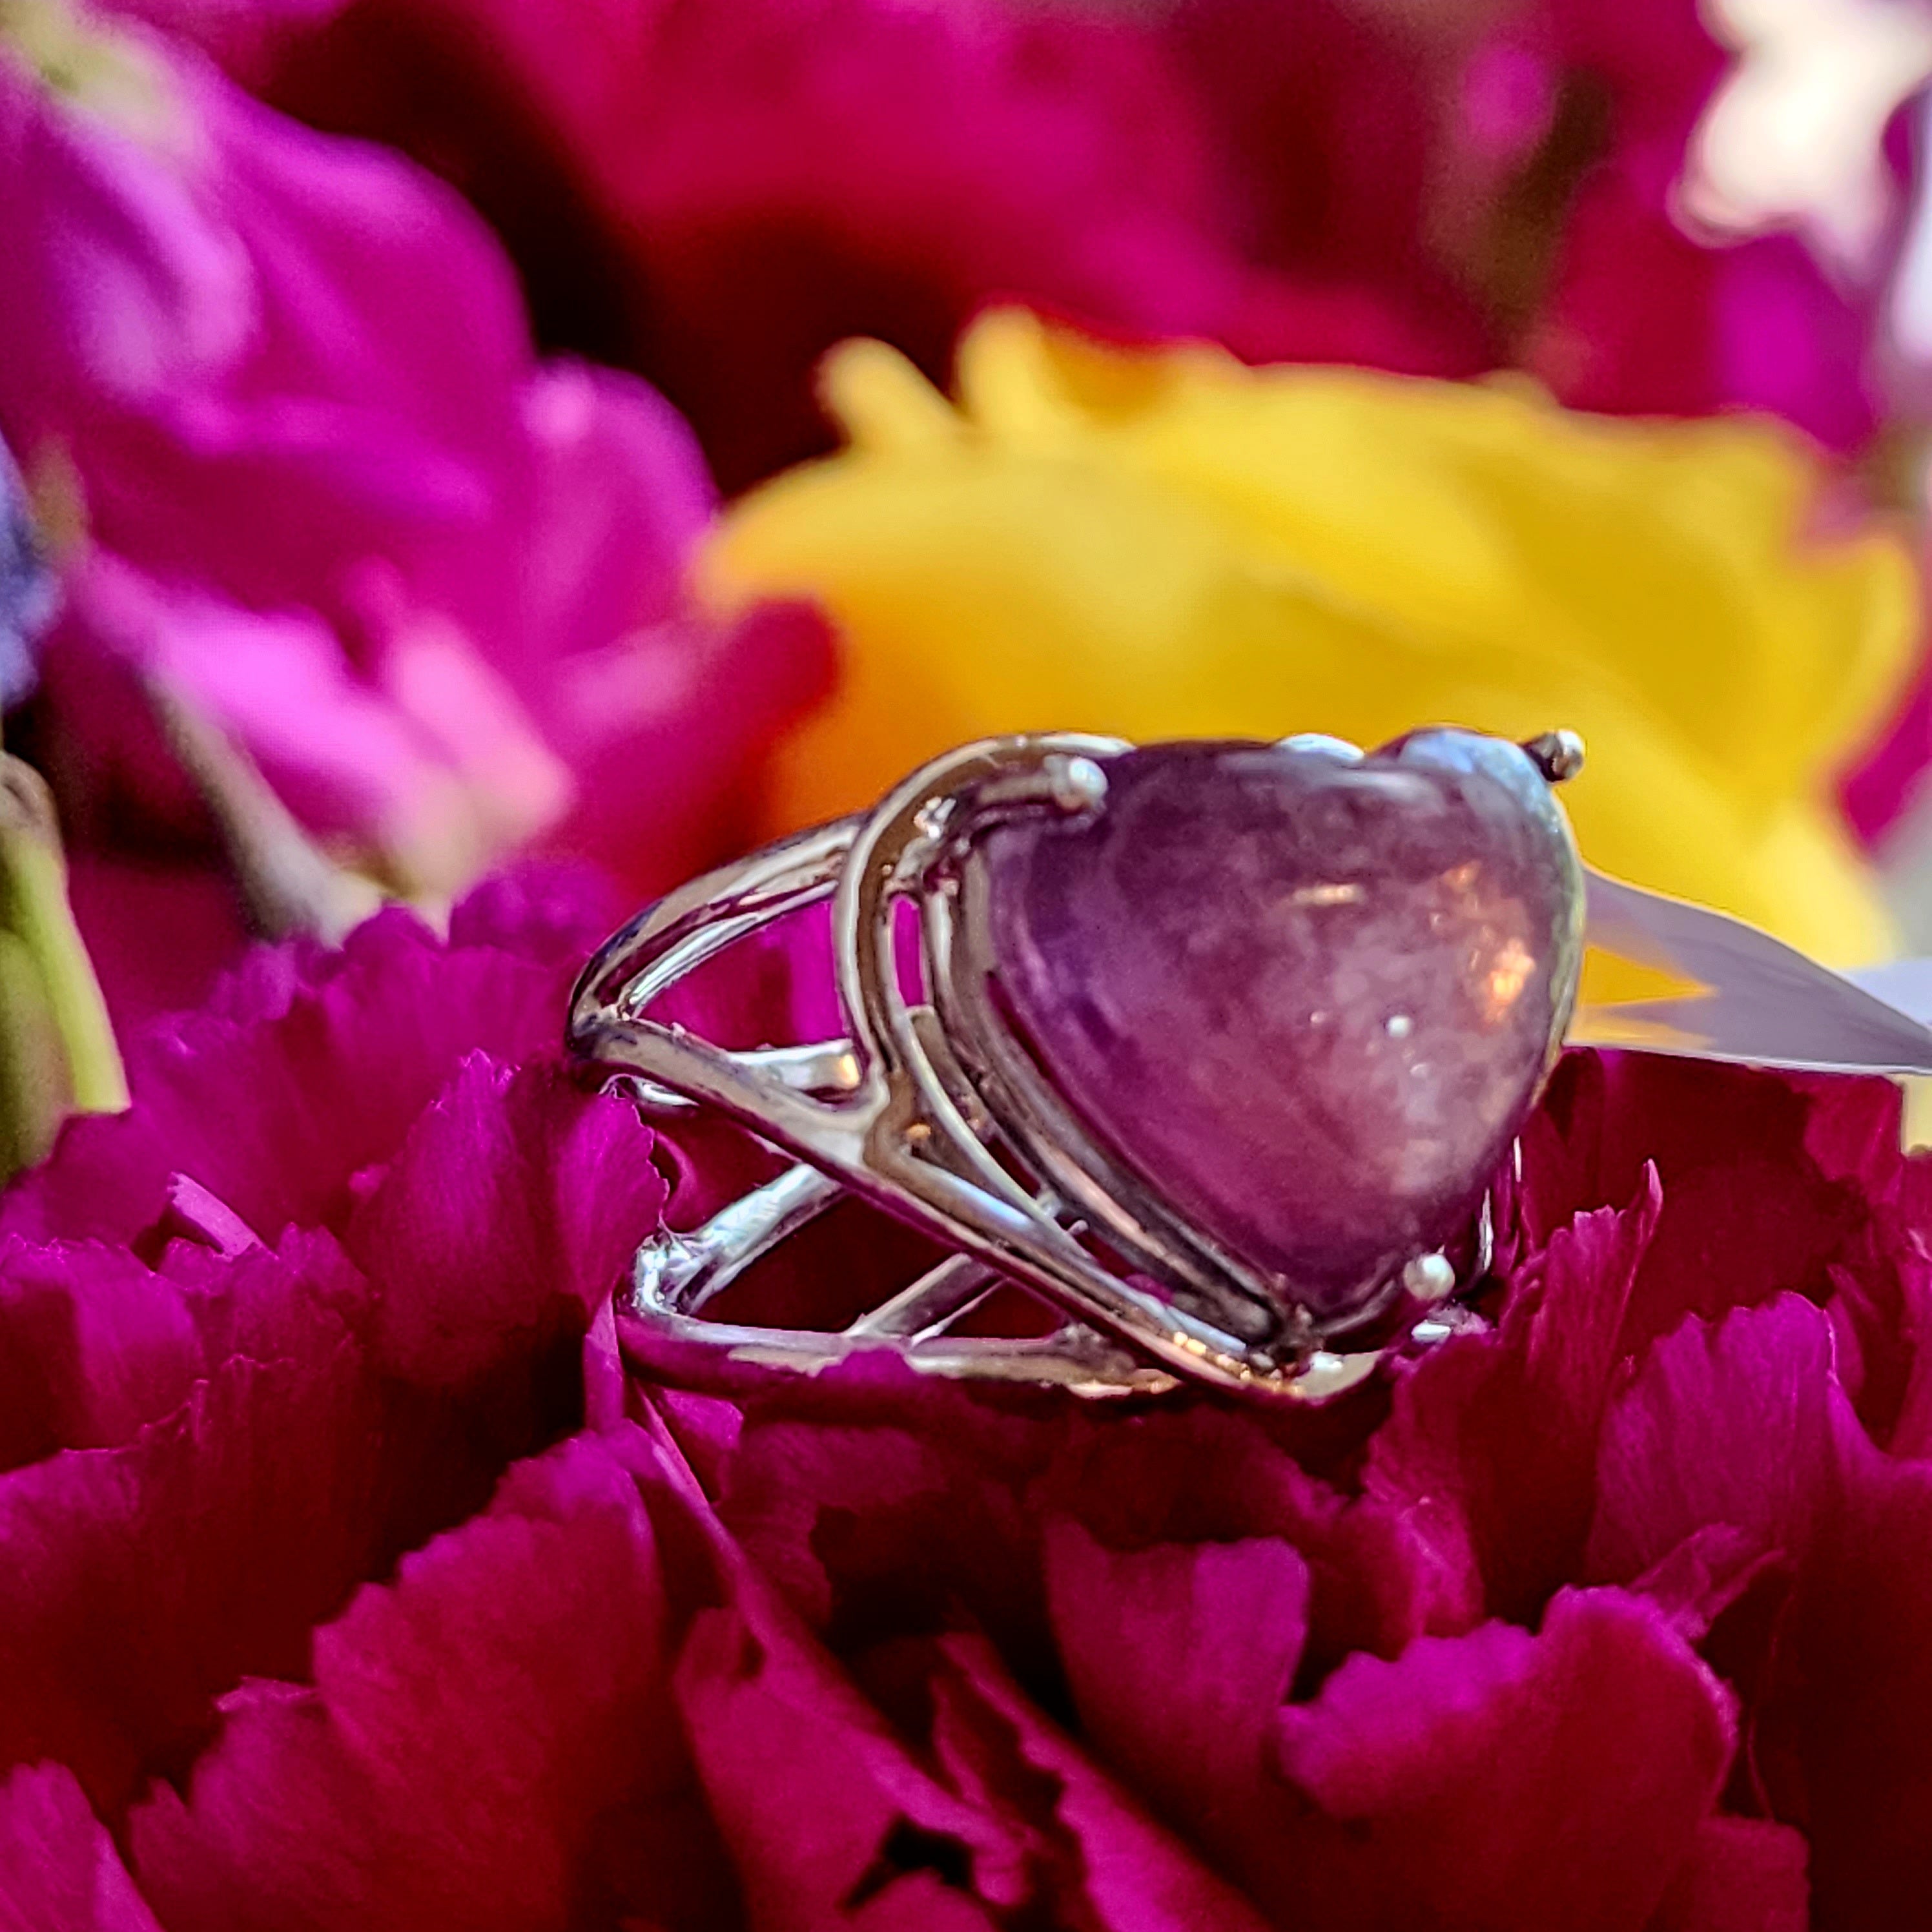 Gem Lepidolite Heart Finger Cuff Adjustable Ring .925 Silver for Balancing the Emotional Body & Calming the Mind